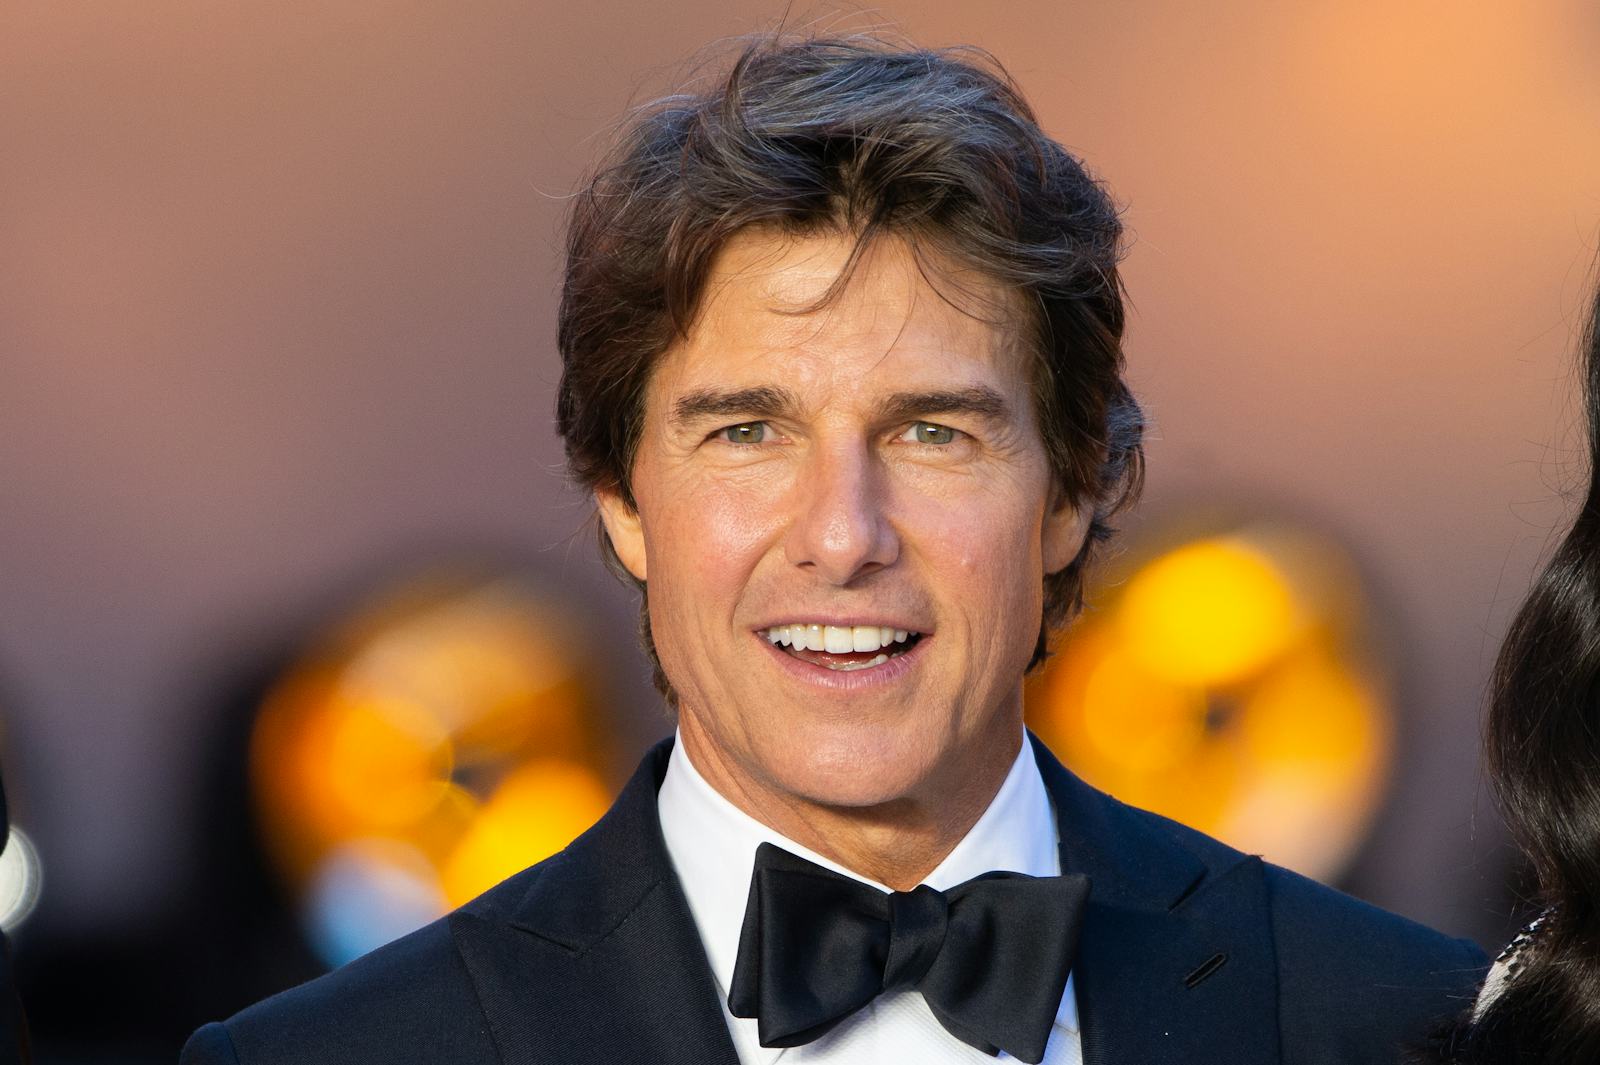 Tom Cruise's Net Worth Here's What He Was Paid For 'Top Gun Maverick